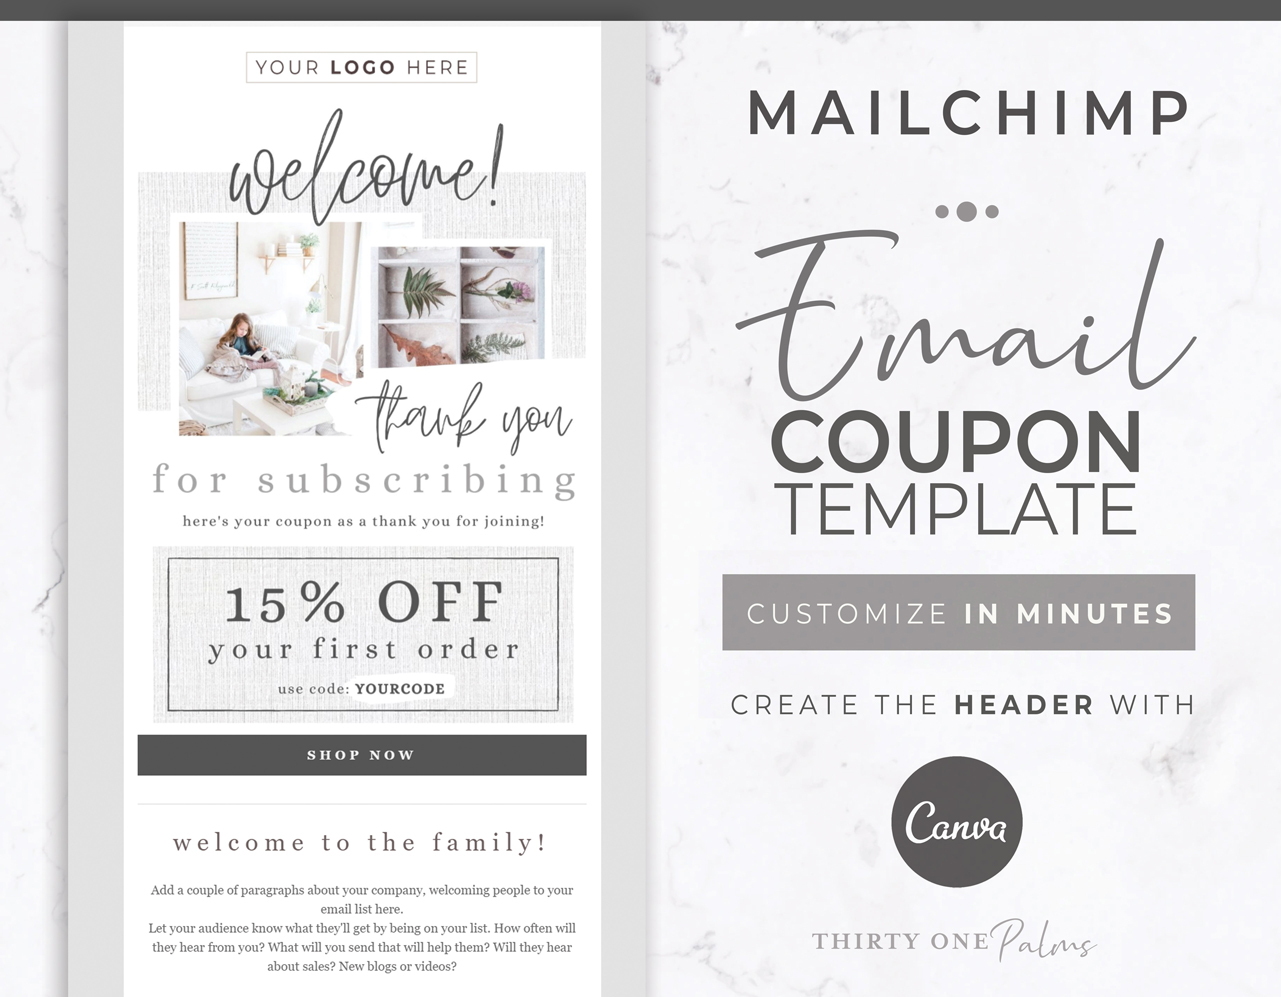 Welcome Coupon Mailchimp + Canva Email Template – White Linen